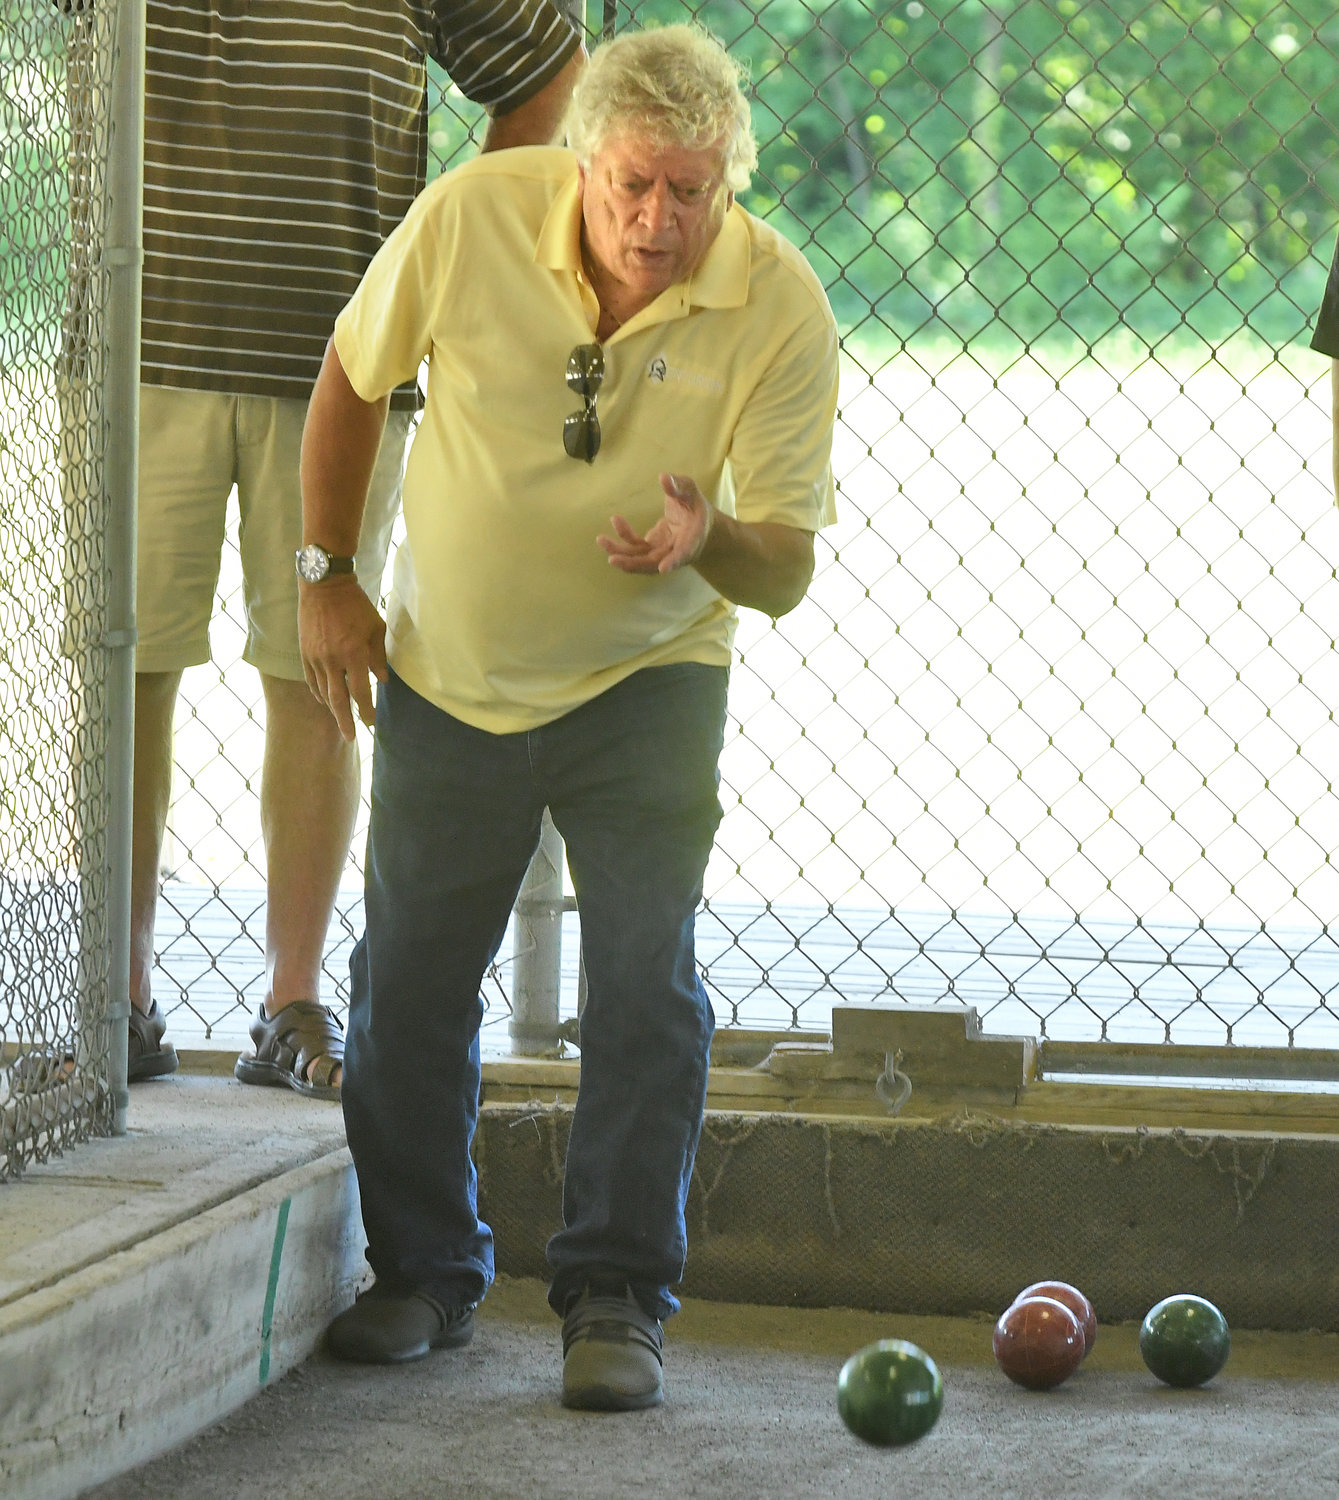 Dave Fiorini makes a shot during the Al Orbinati Memorial Tournament at the Toccolana Club on East Dominick Street Saturday. Players were tuning up for the 47th World Series of Bocce this weekend, also at the club. The event will include 98 Open Division teams and 33 in the Women's Division.